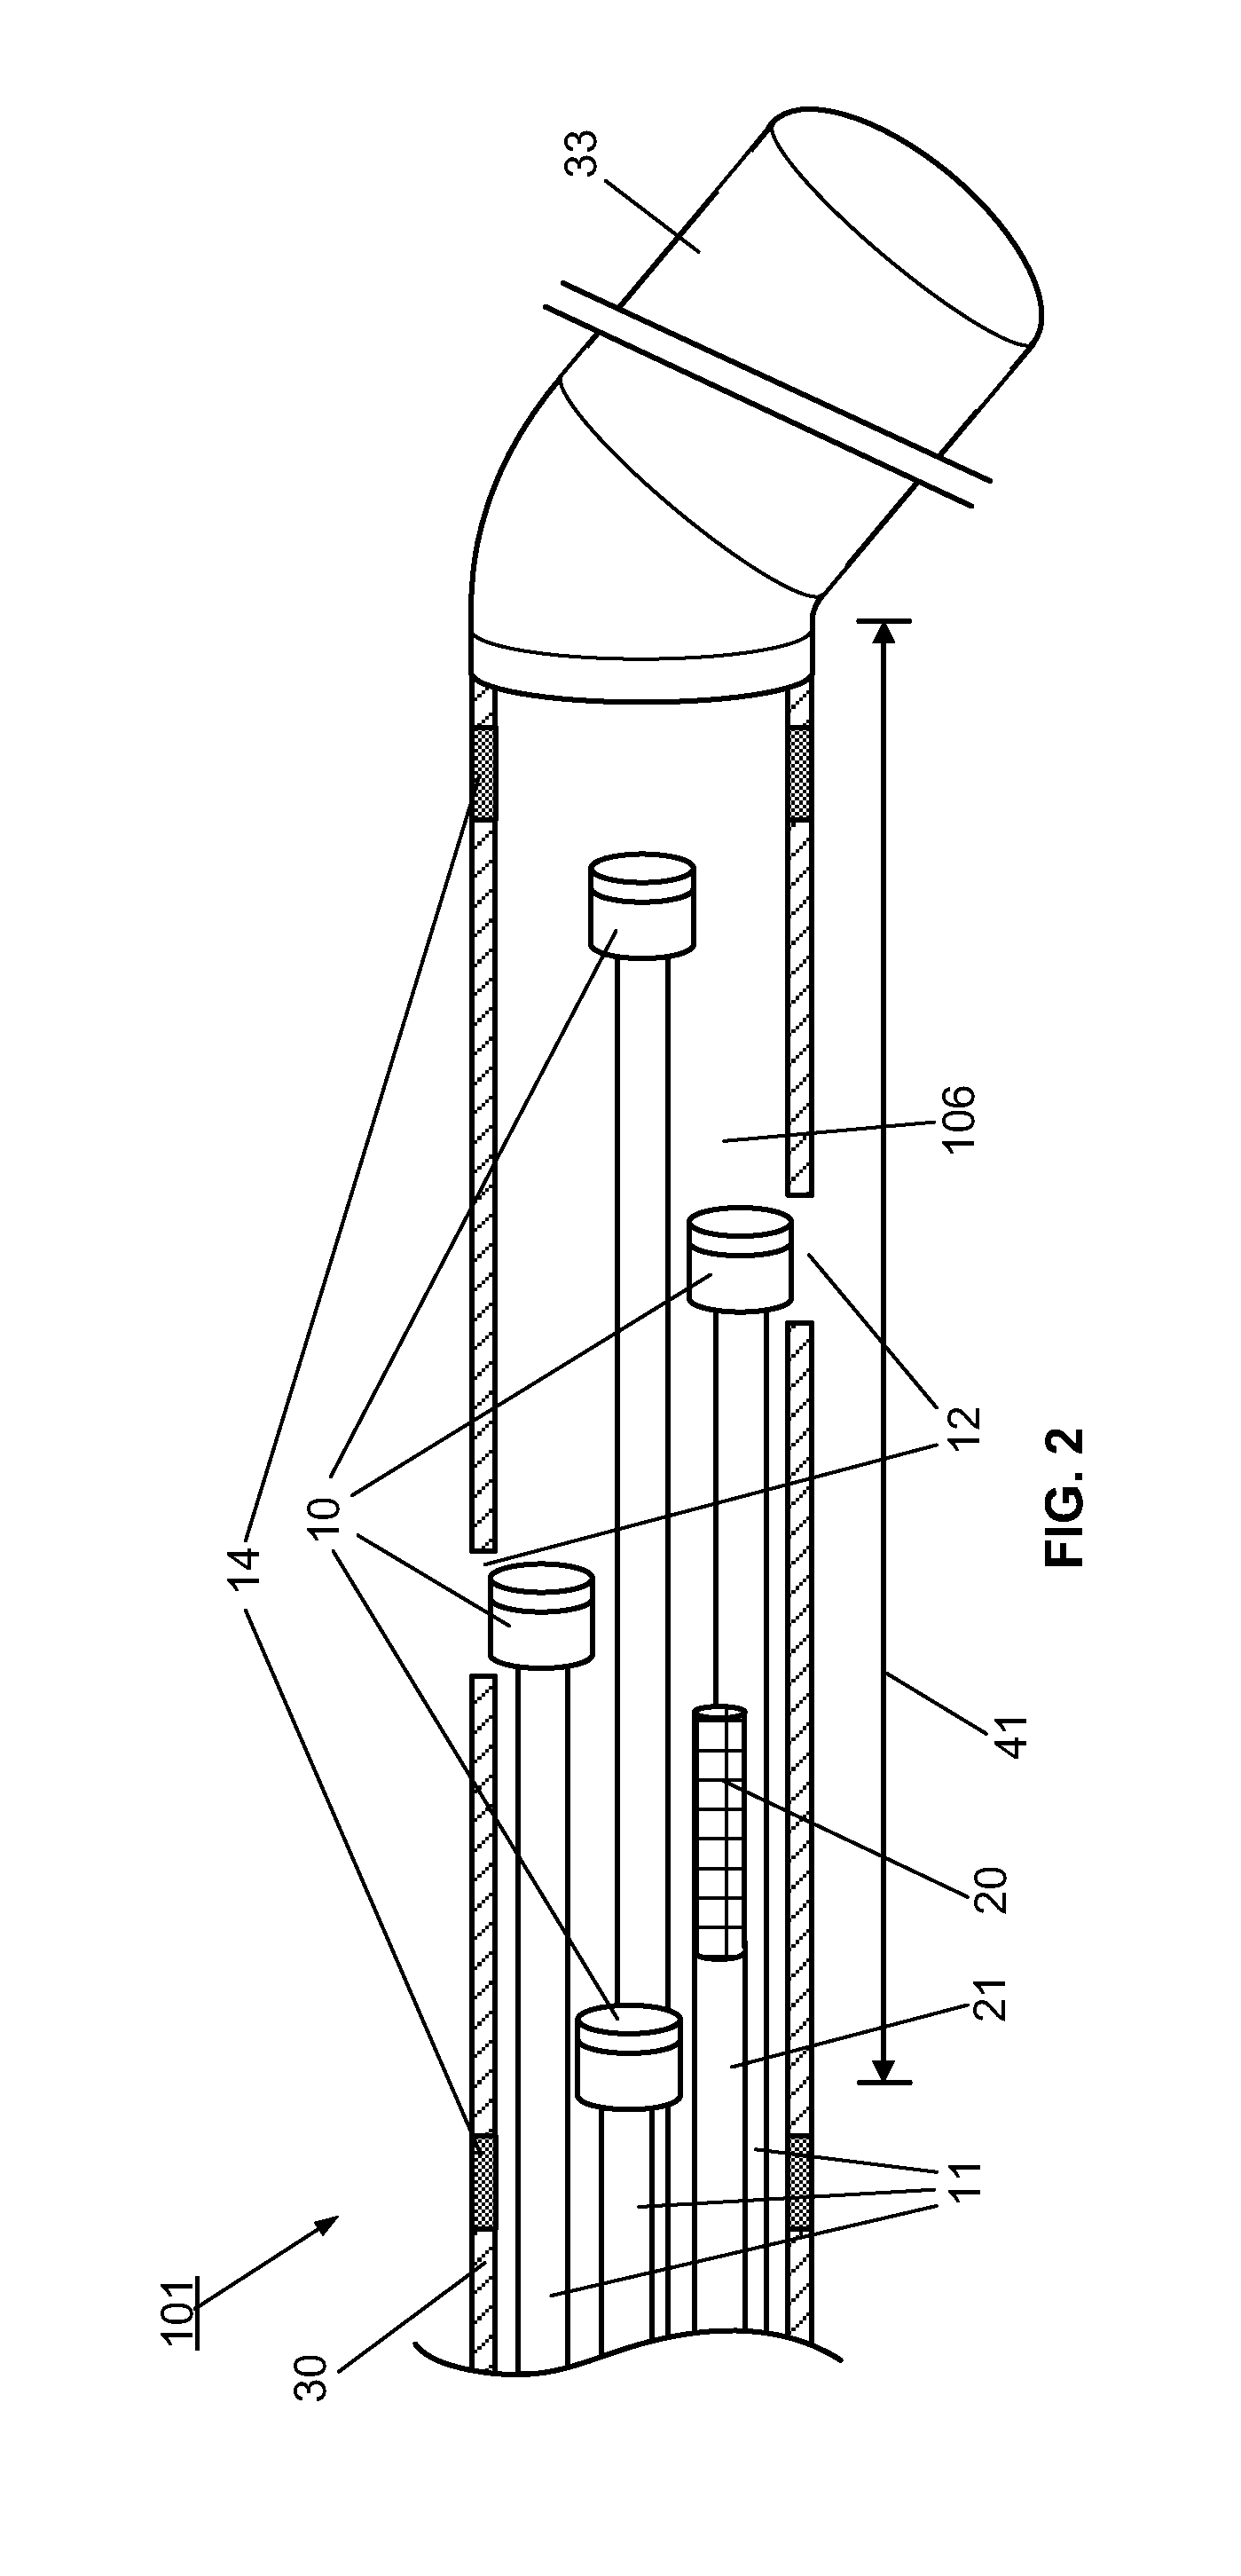 Apparatus, system and methods for measuring a blood pressure gradient